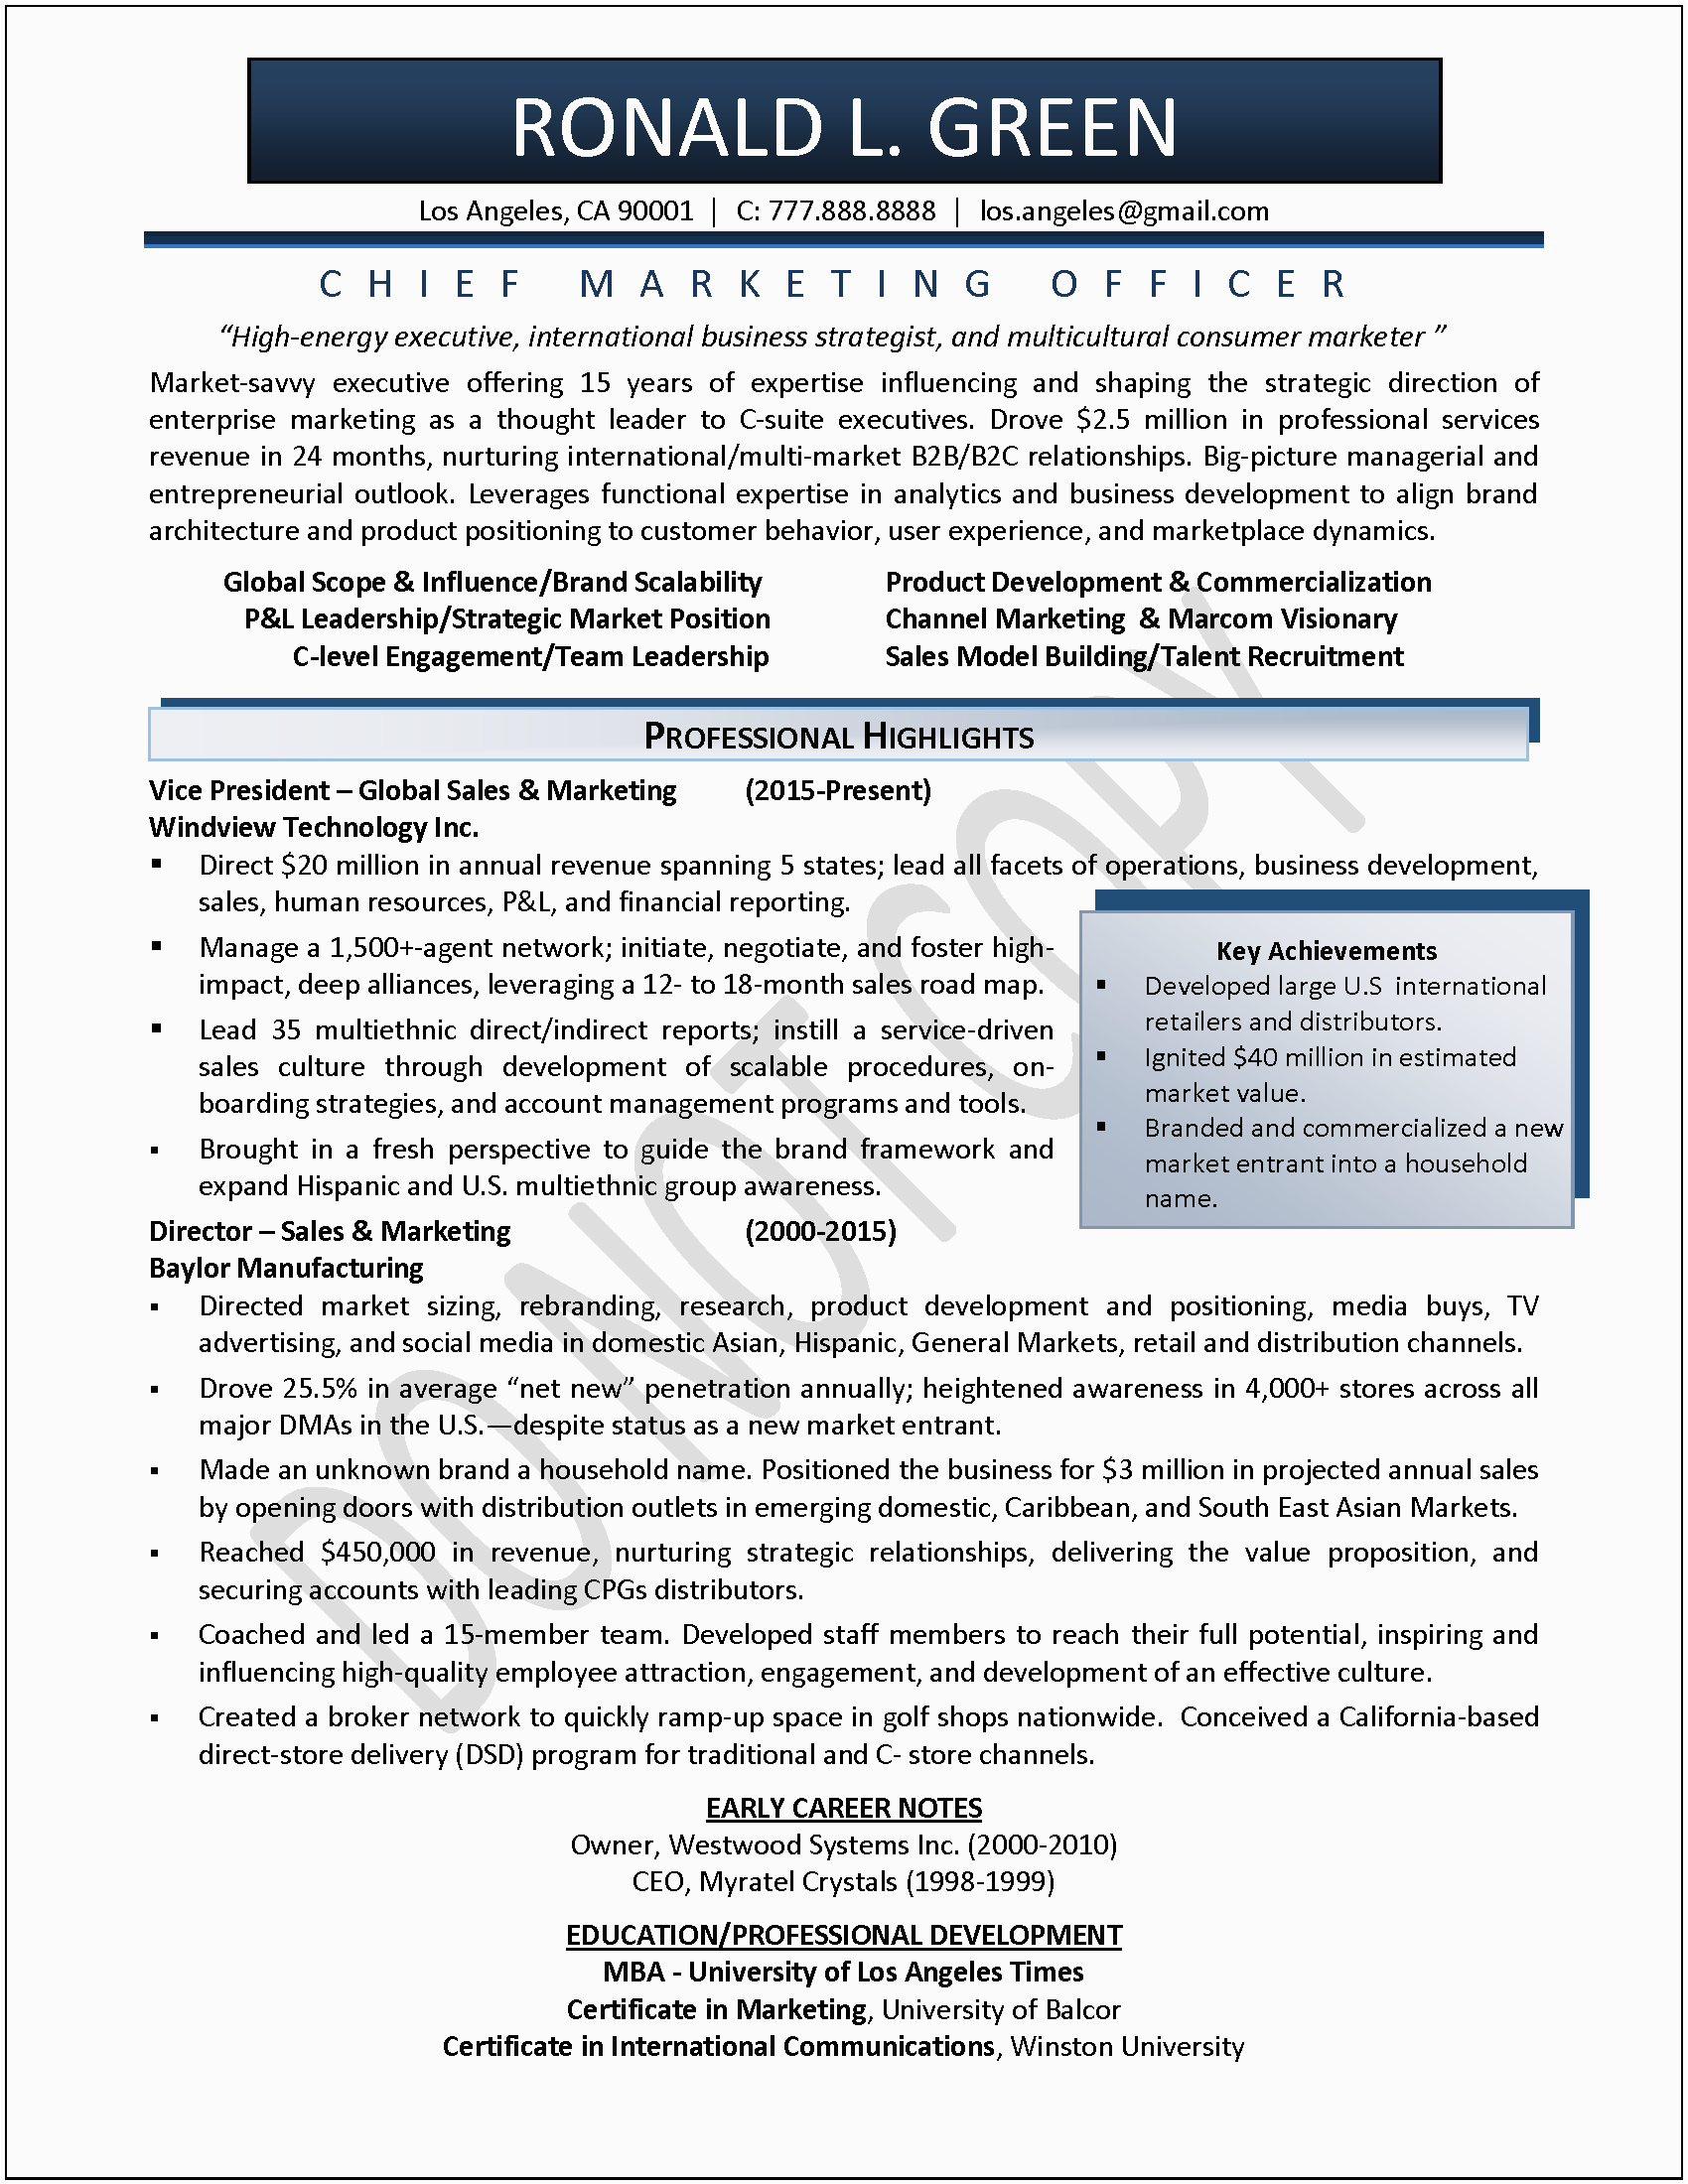 Sample Resume for Sales and Marketing Executive Executive Resume Samples